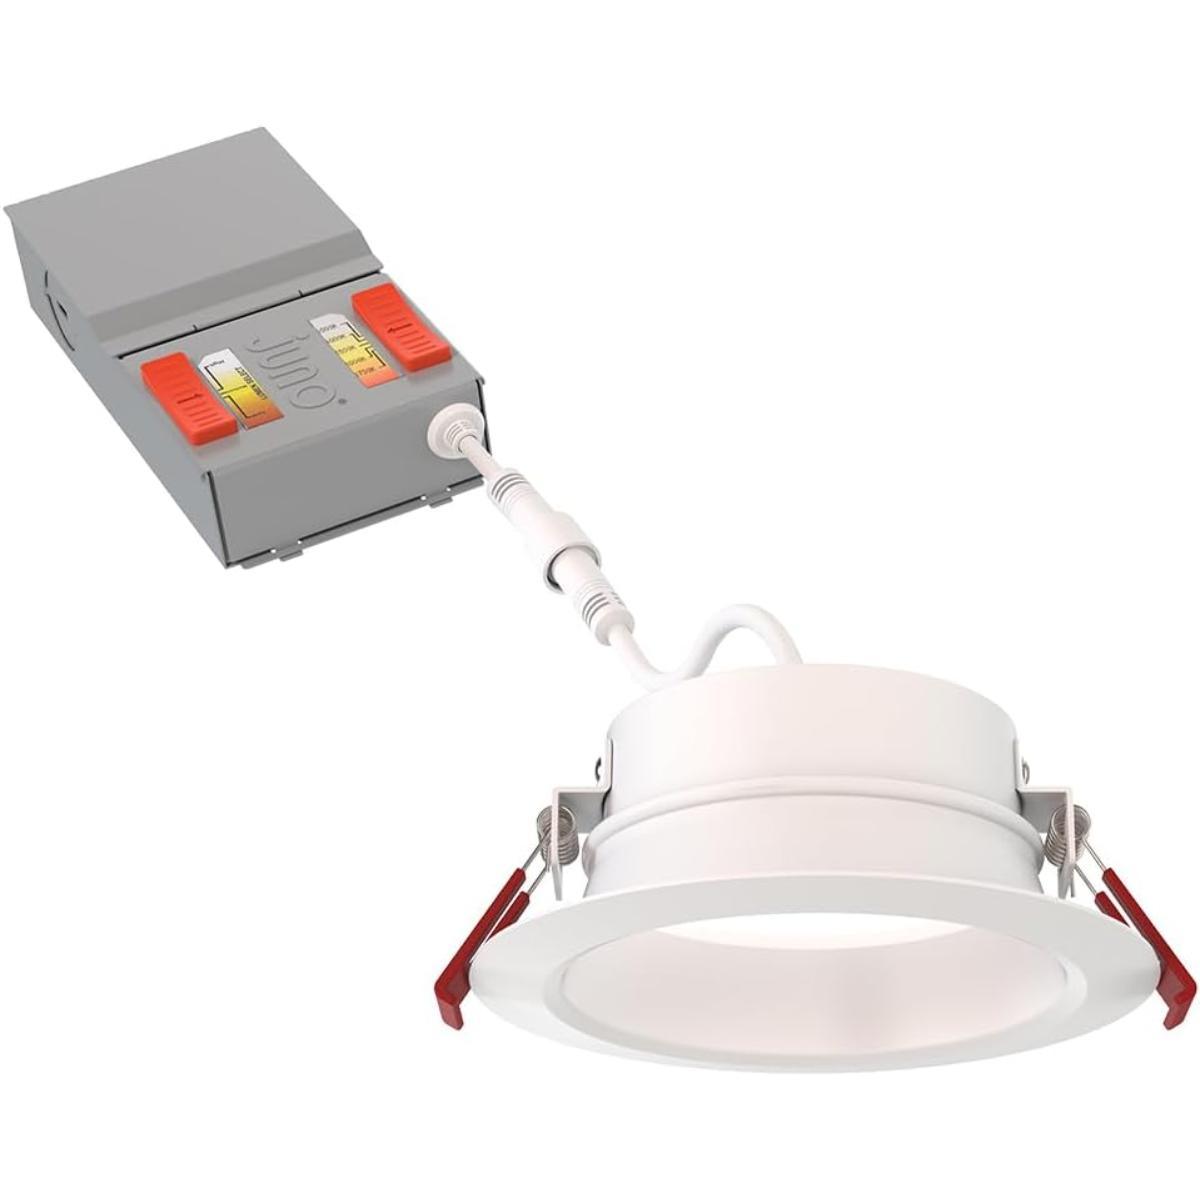 4 inch Wafer Canless LED Recessed Light, 14.5 Watt, 1100 Lumens, Selectable CCT, 2700K to 5000K, Smooth Trim - Bees Lighting